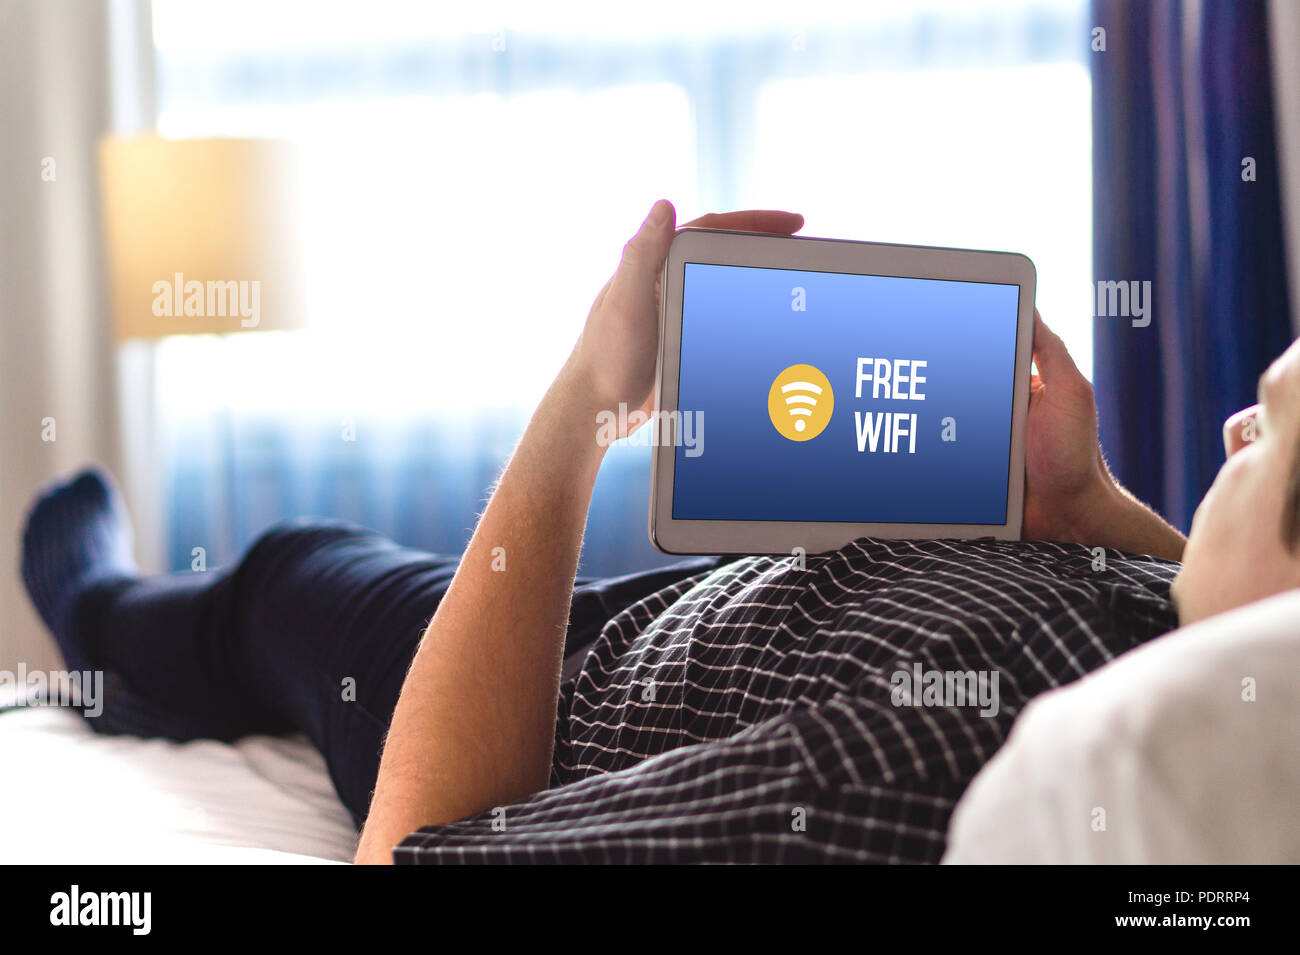 Man using free hotel wifi with tablet. Lying in hotel room bed and browsing internet. Public access online and connection available for customers. Stock Photo